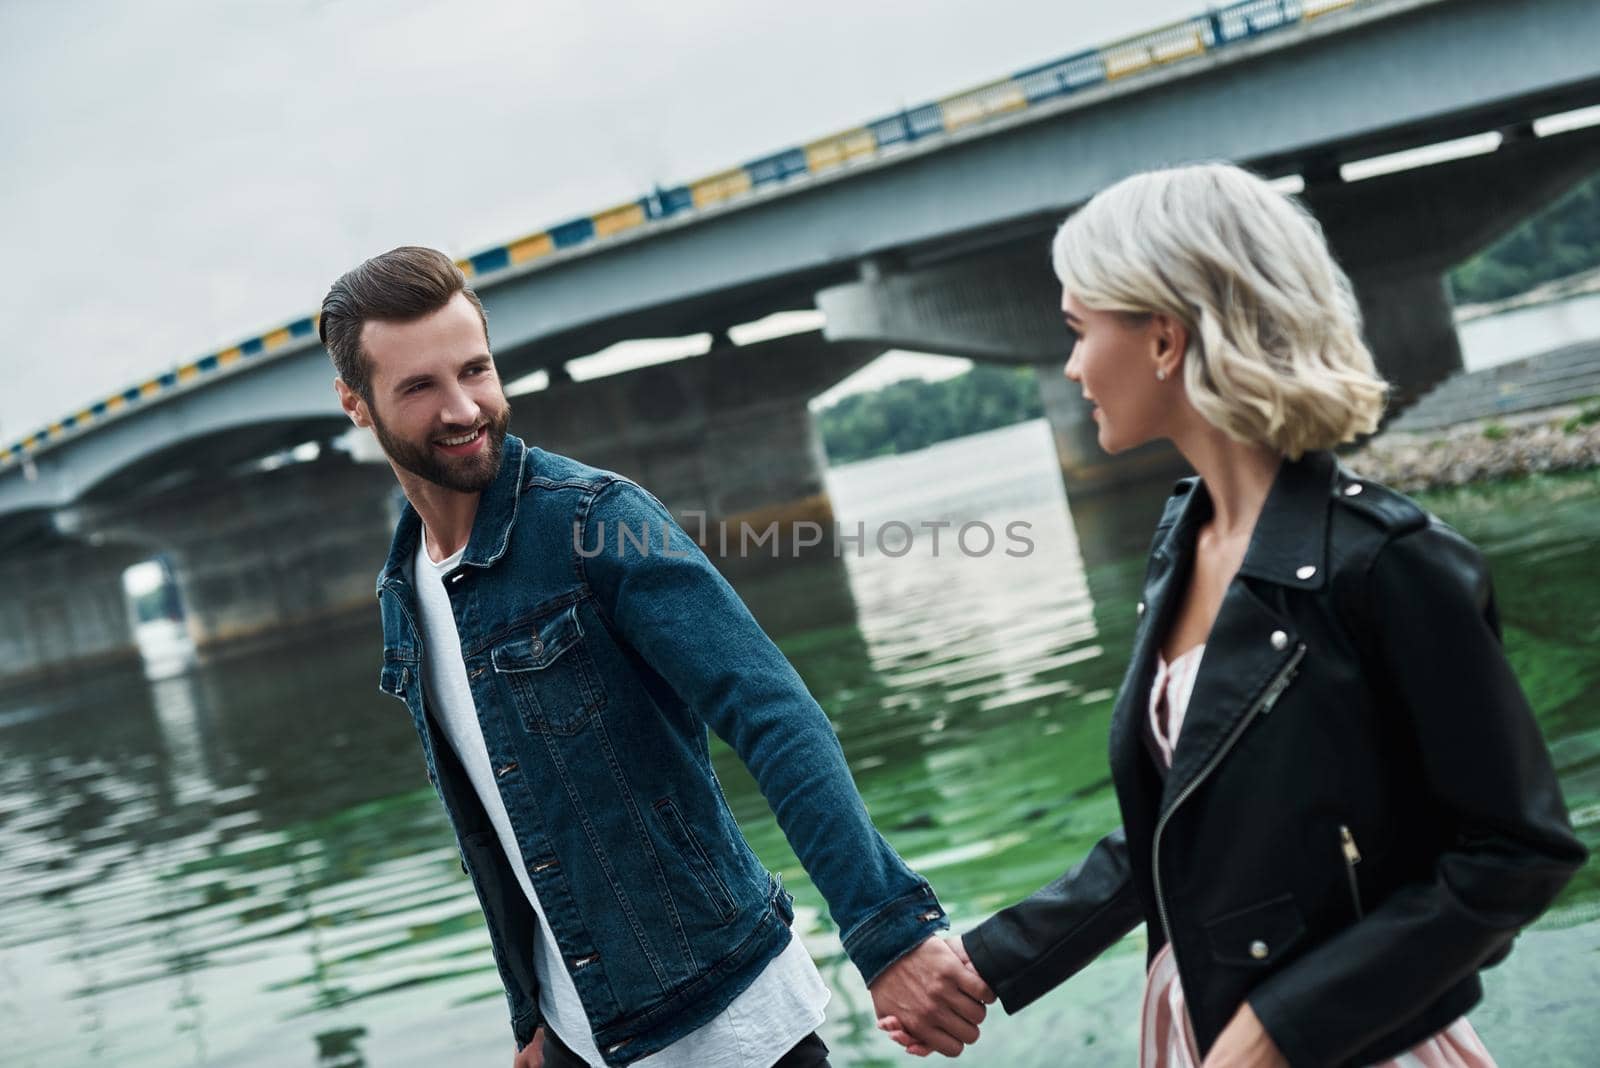 Romantic date outdoors. Young couple walking on the city street near water holding hands looking at each other talking smiling joyful